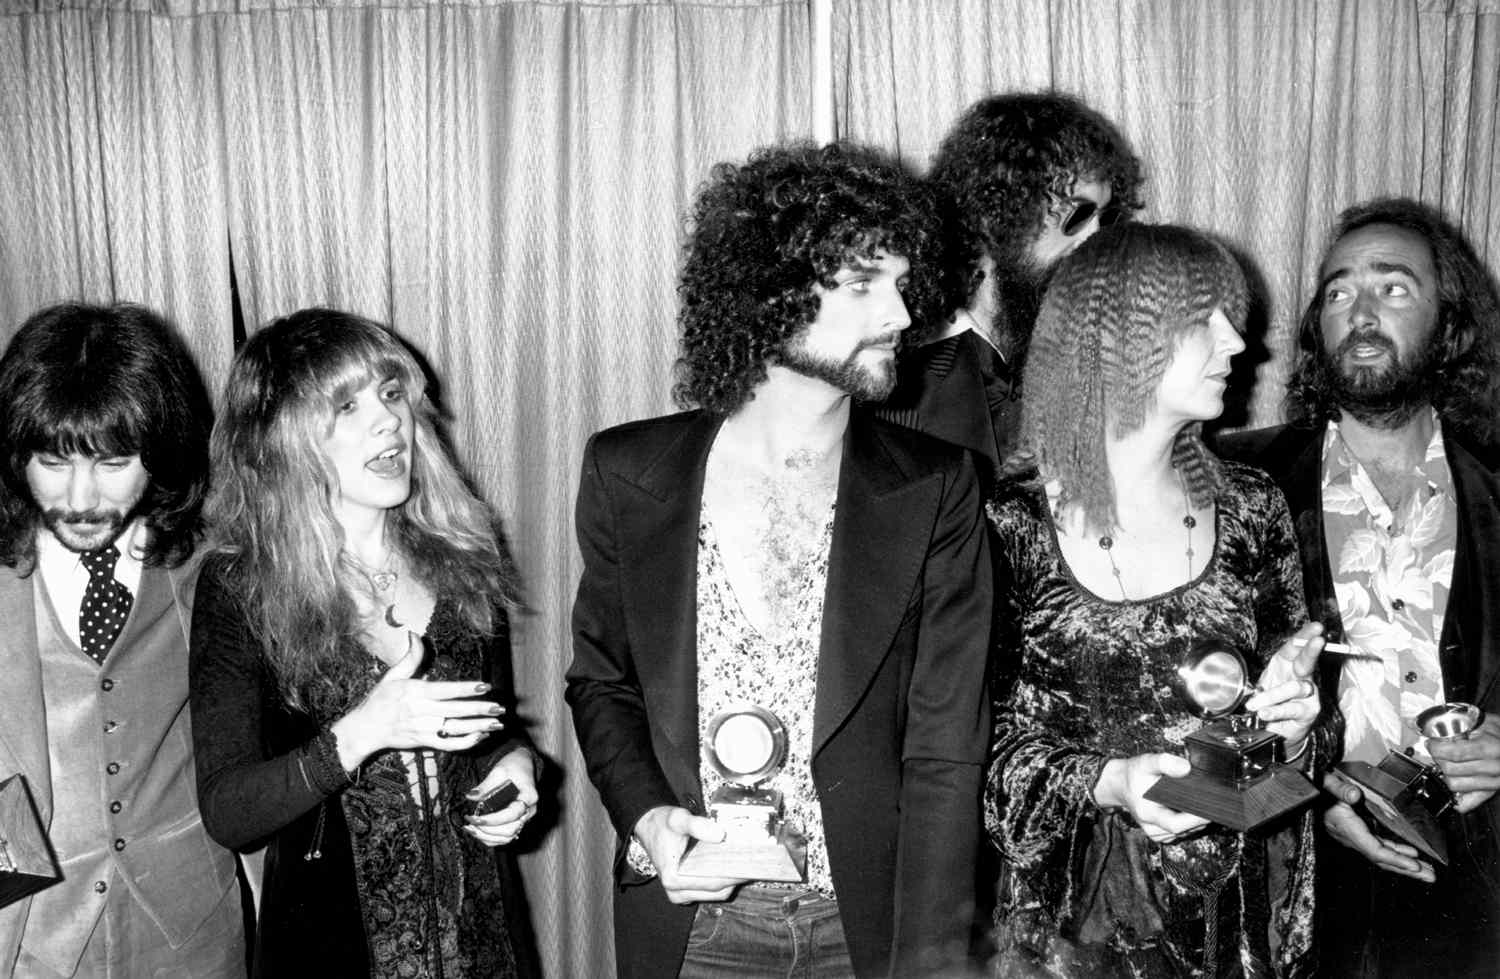 Rock group Fleetwood Mac wins the Album of the year award at the 20th Grammy awards at the Shrine Auditorium. Left to right producer Richard Dashut, Stevie Nicks, Lindsey Buckingham, Mick Fleetwood, Christine McVie and John McVie on February 23, 1978 in Los Angeles, California.